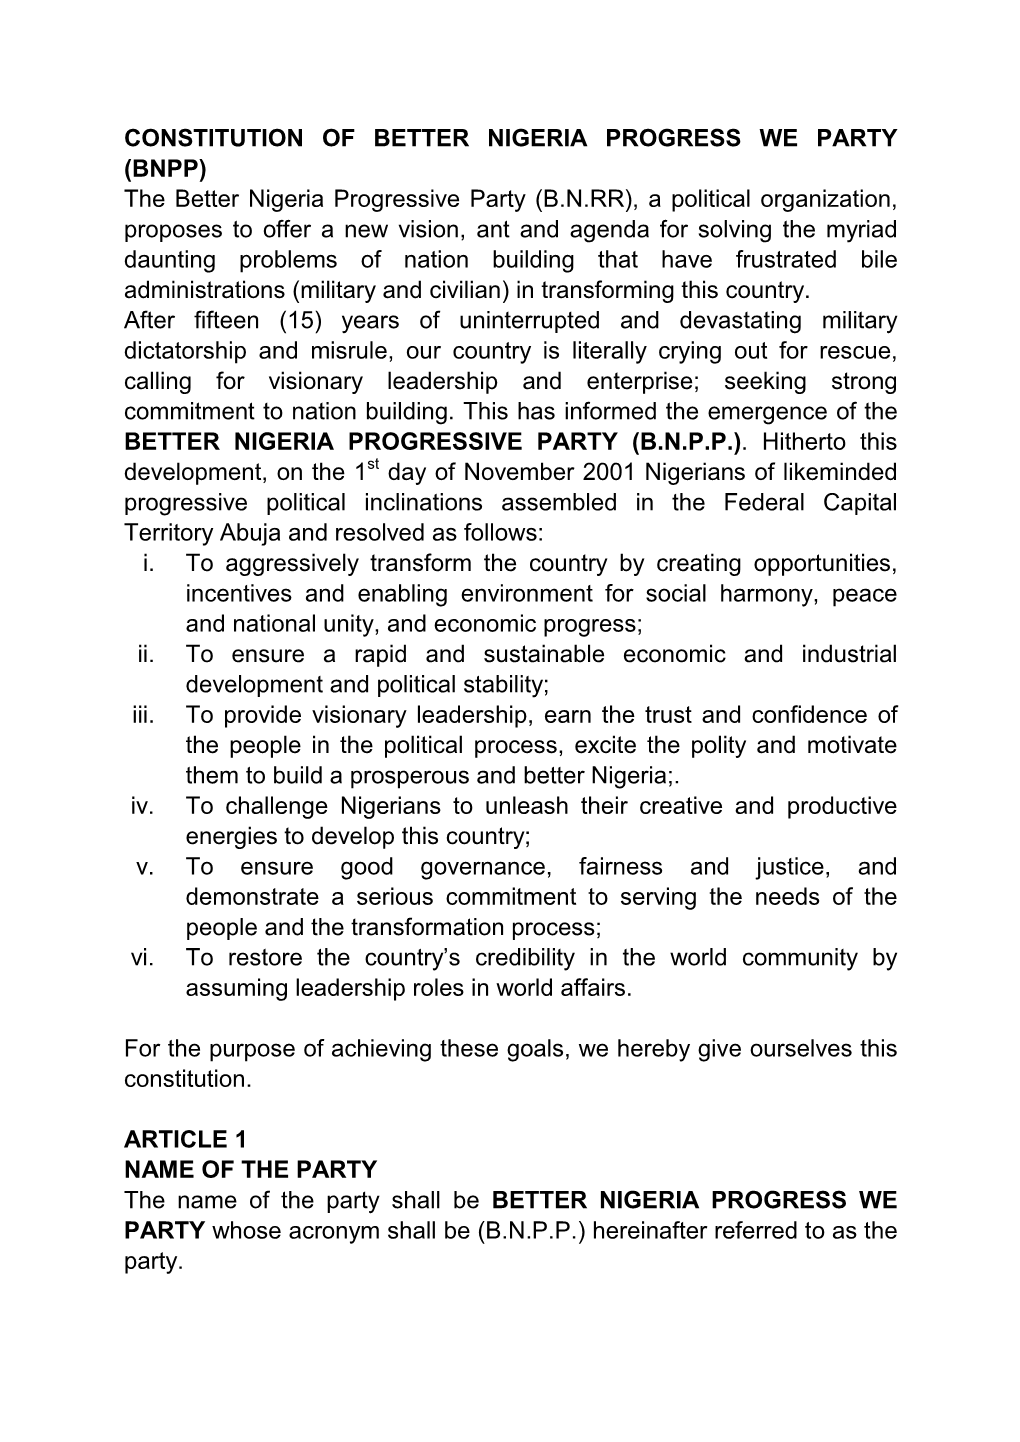 Constitution of Better Nigeria Progress We Party